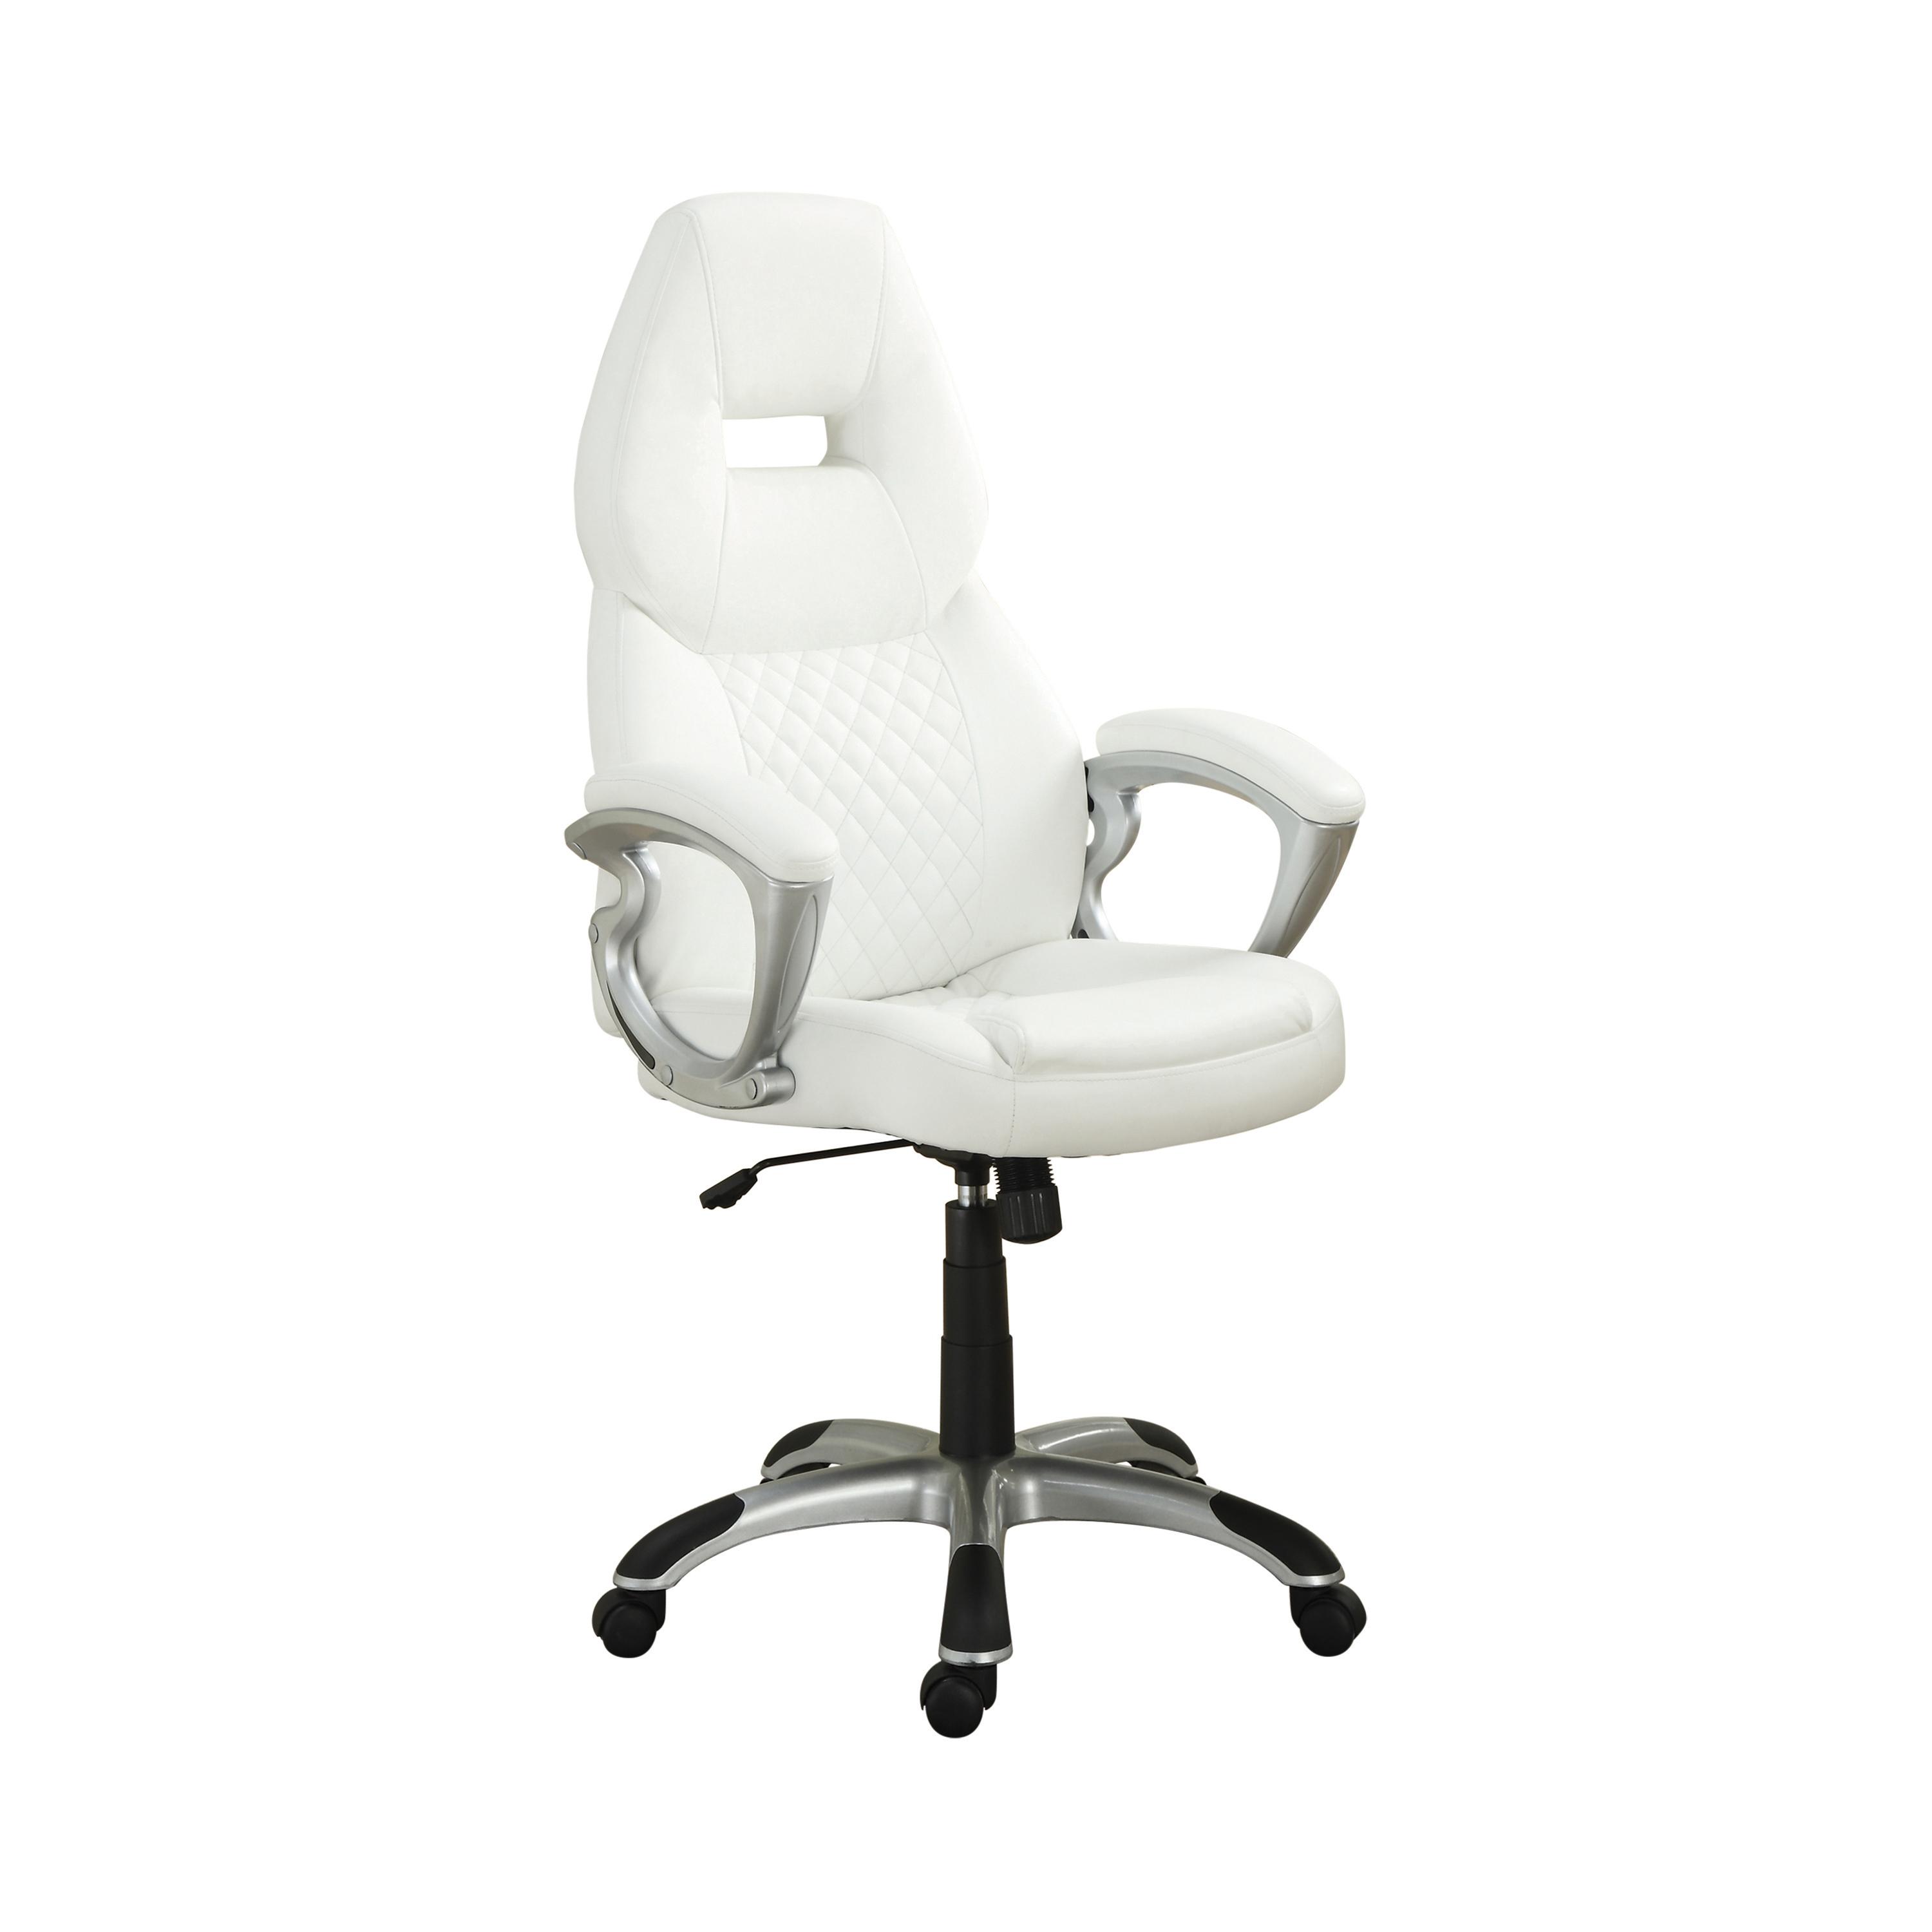 Contemporary Office Chair 800150 800150 in White Leatherette